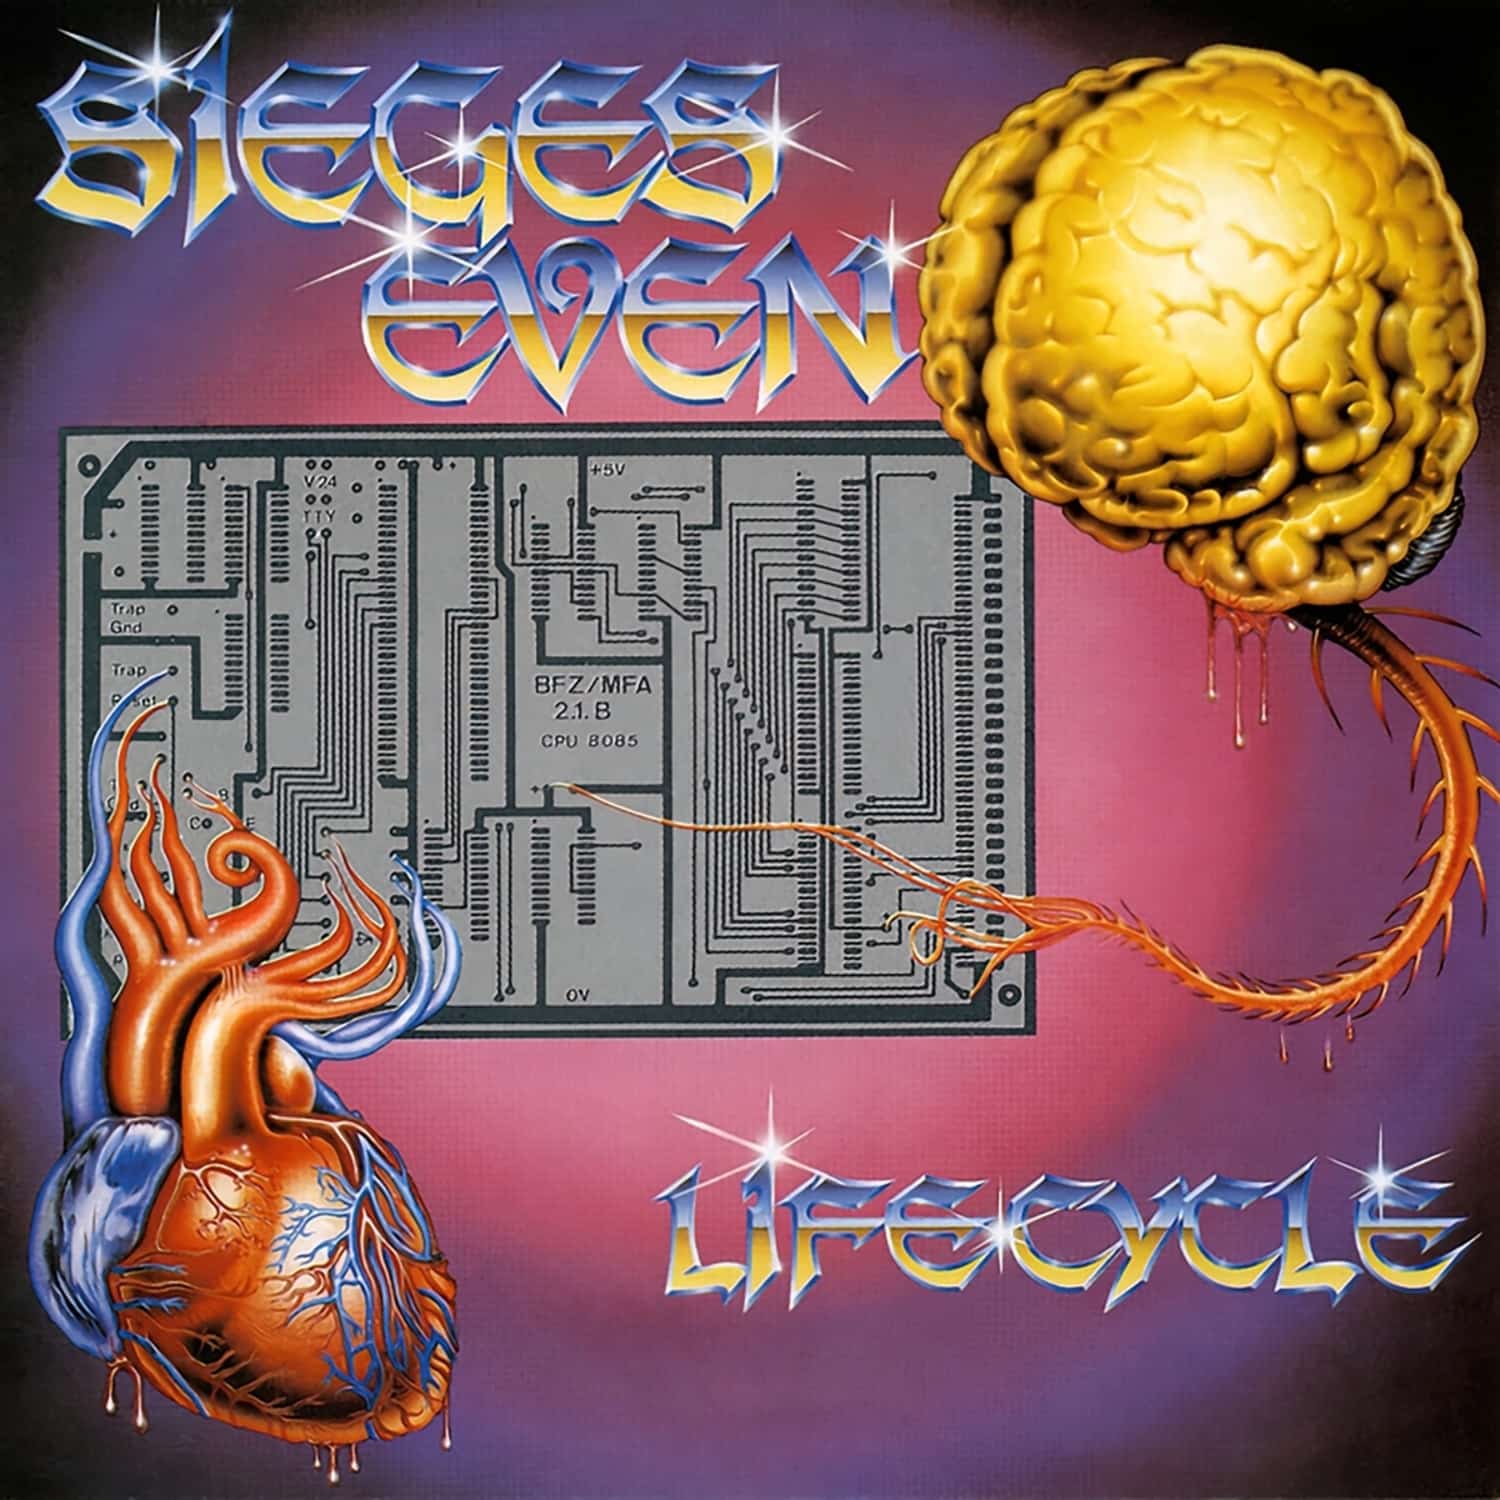 Sieges Even - LIFE CYCLE